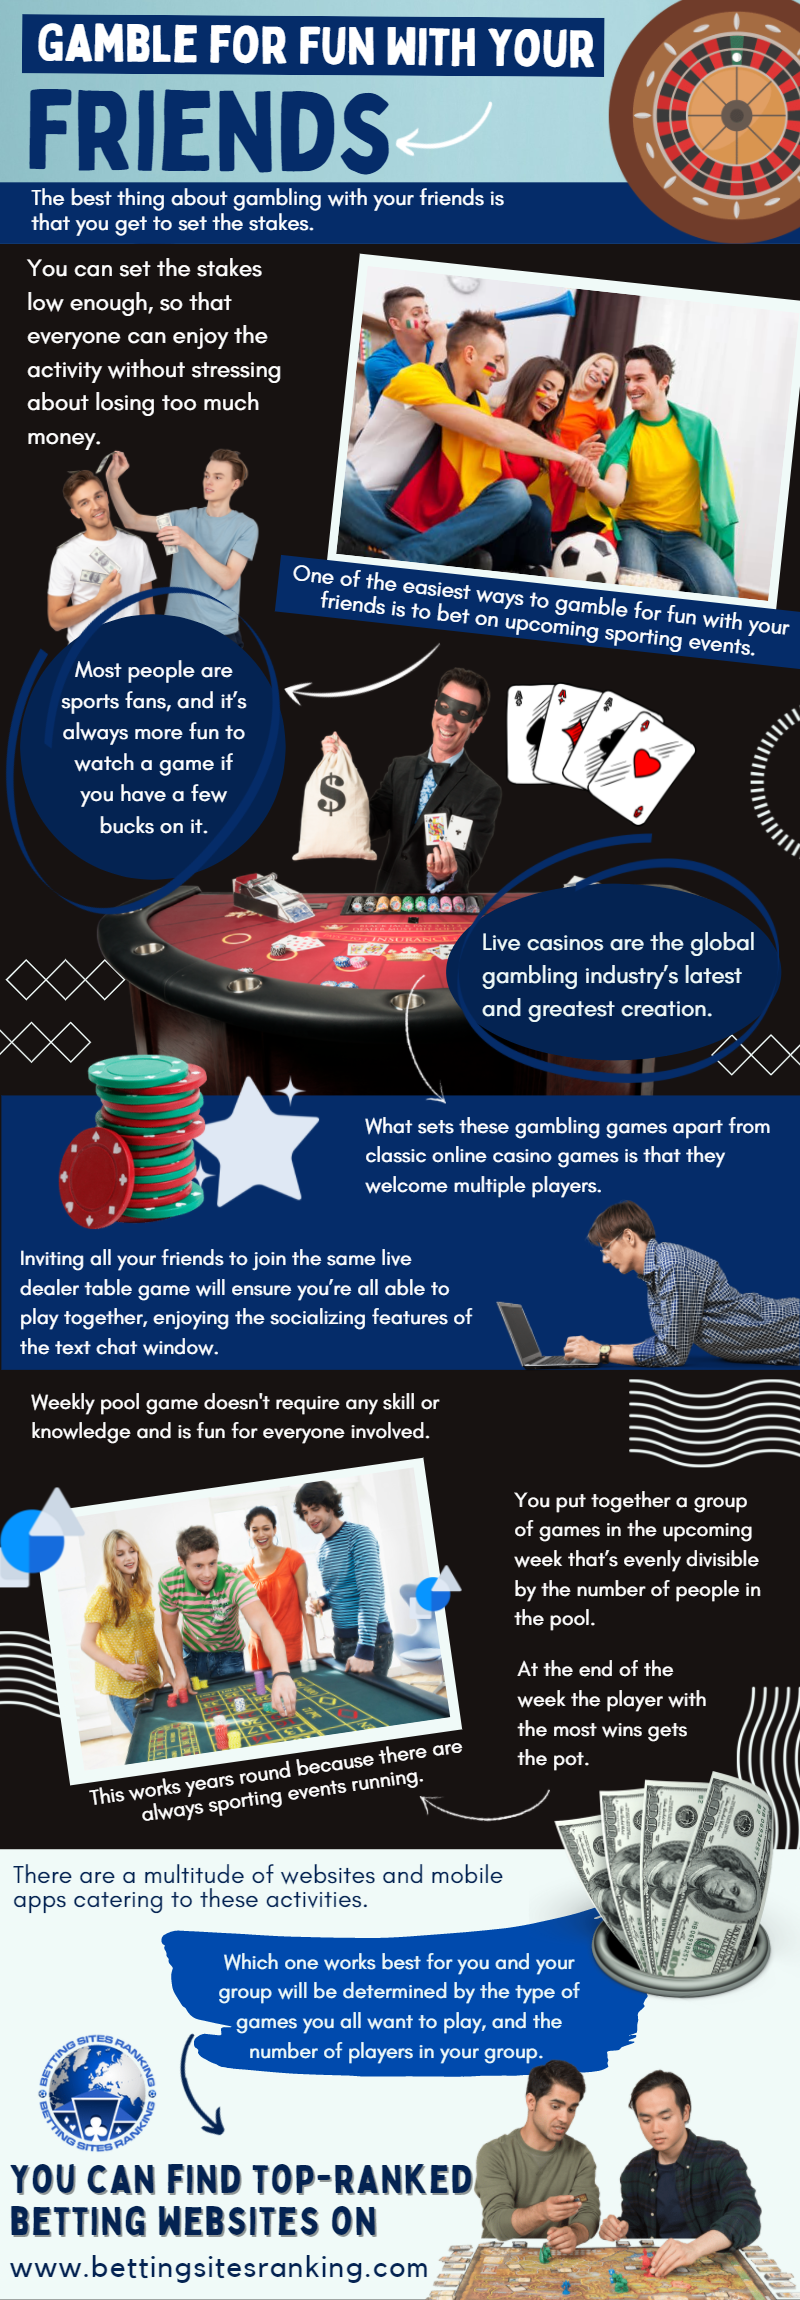 Gamble-For-Fun-With-Your-Friends